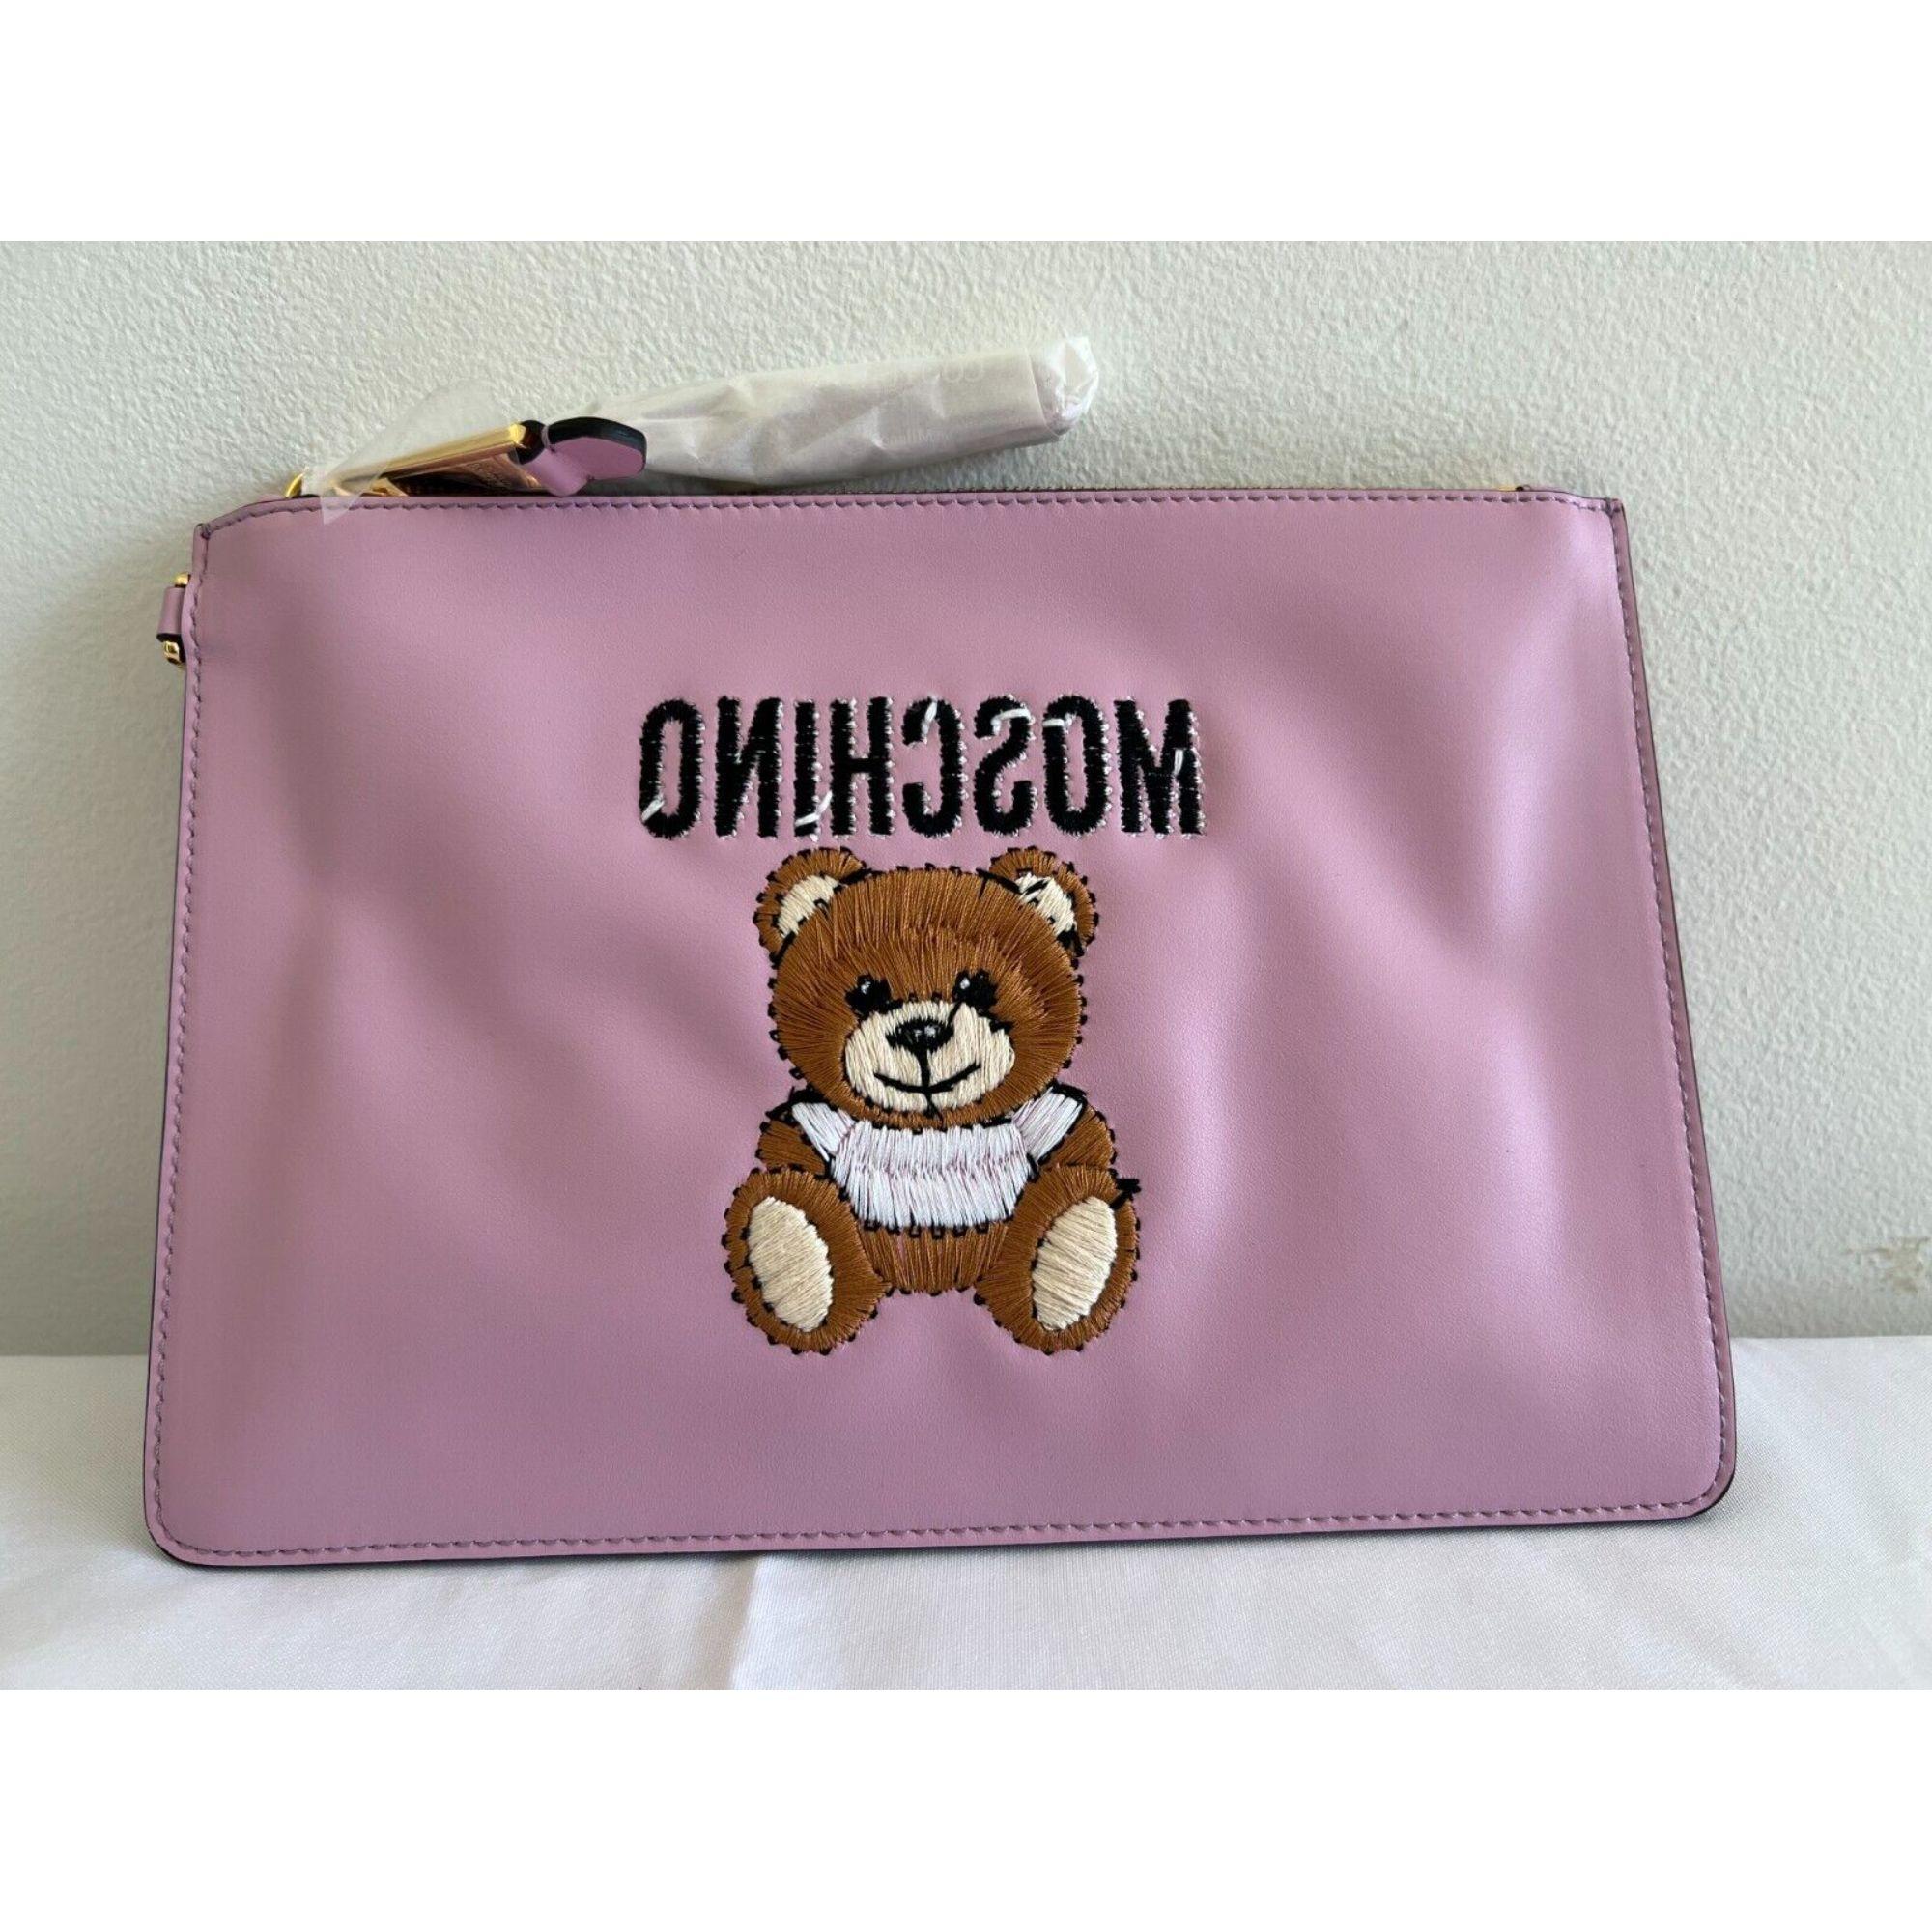 SS21 Moschino Couture Pink Clutch with Embroidered Teddy Bear by Jeremy Scott For Sale 6